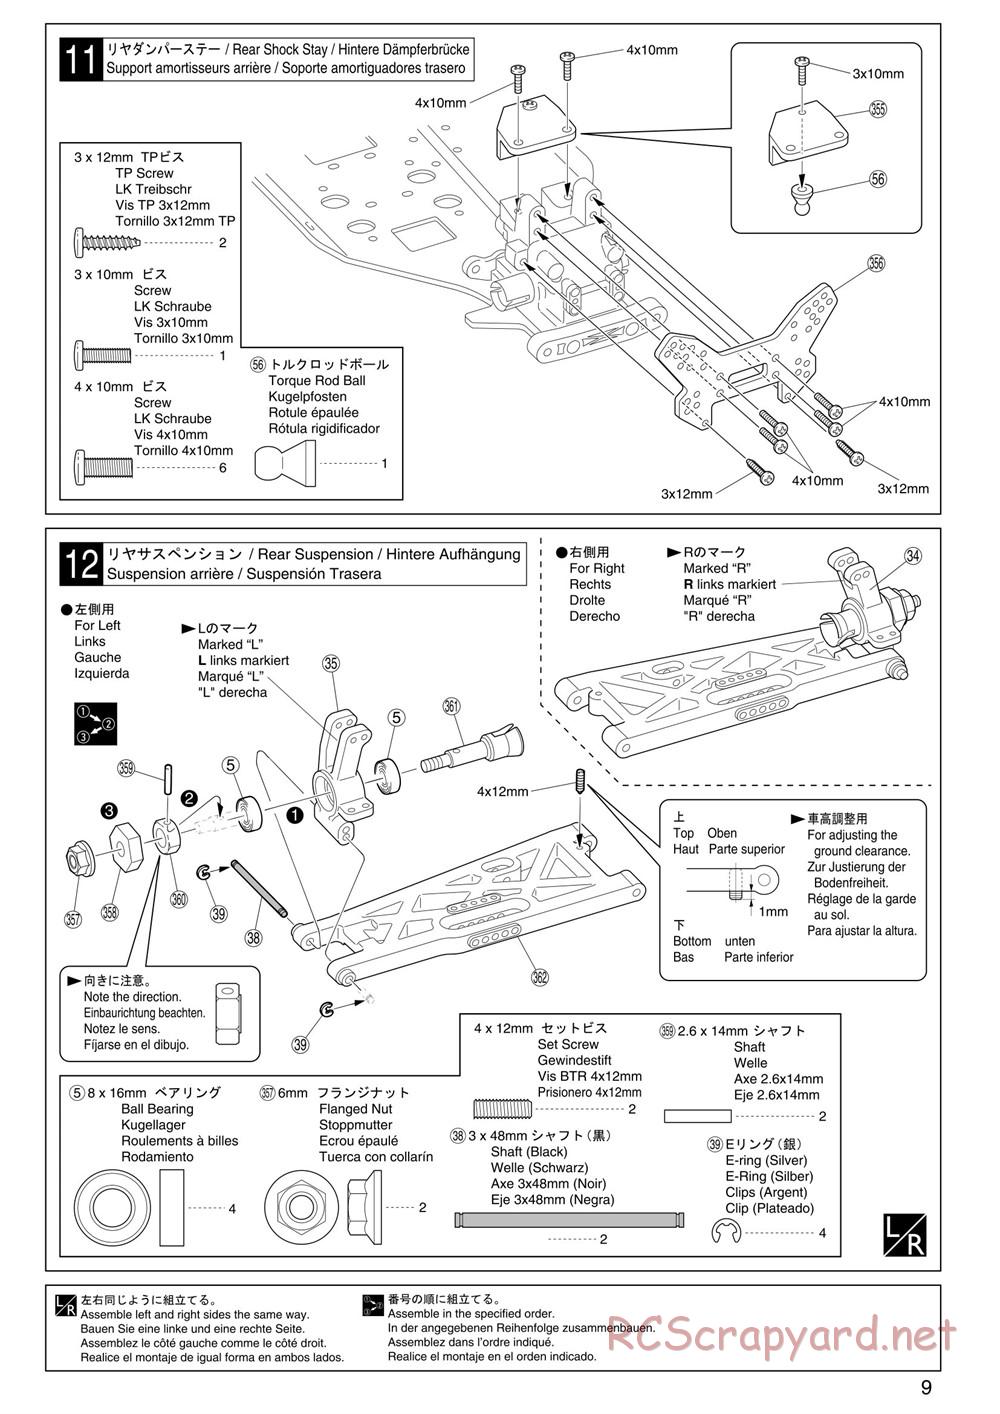 Kyosho - Inferno ST (2005) - Manual - Page 9